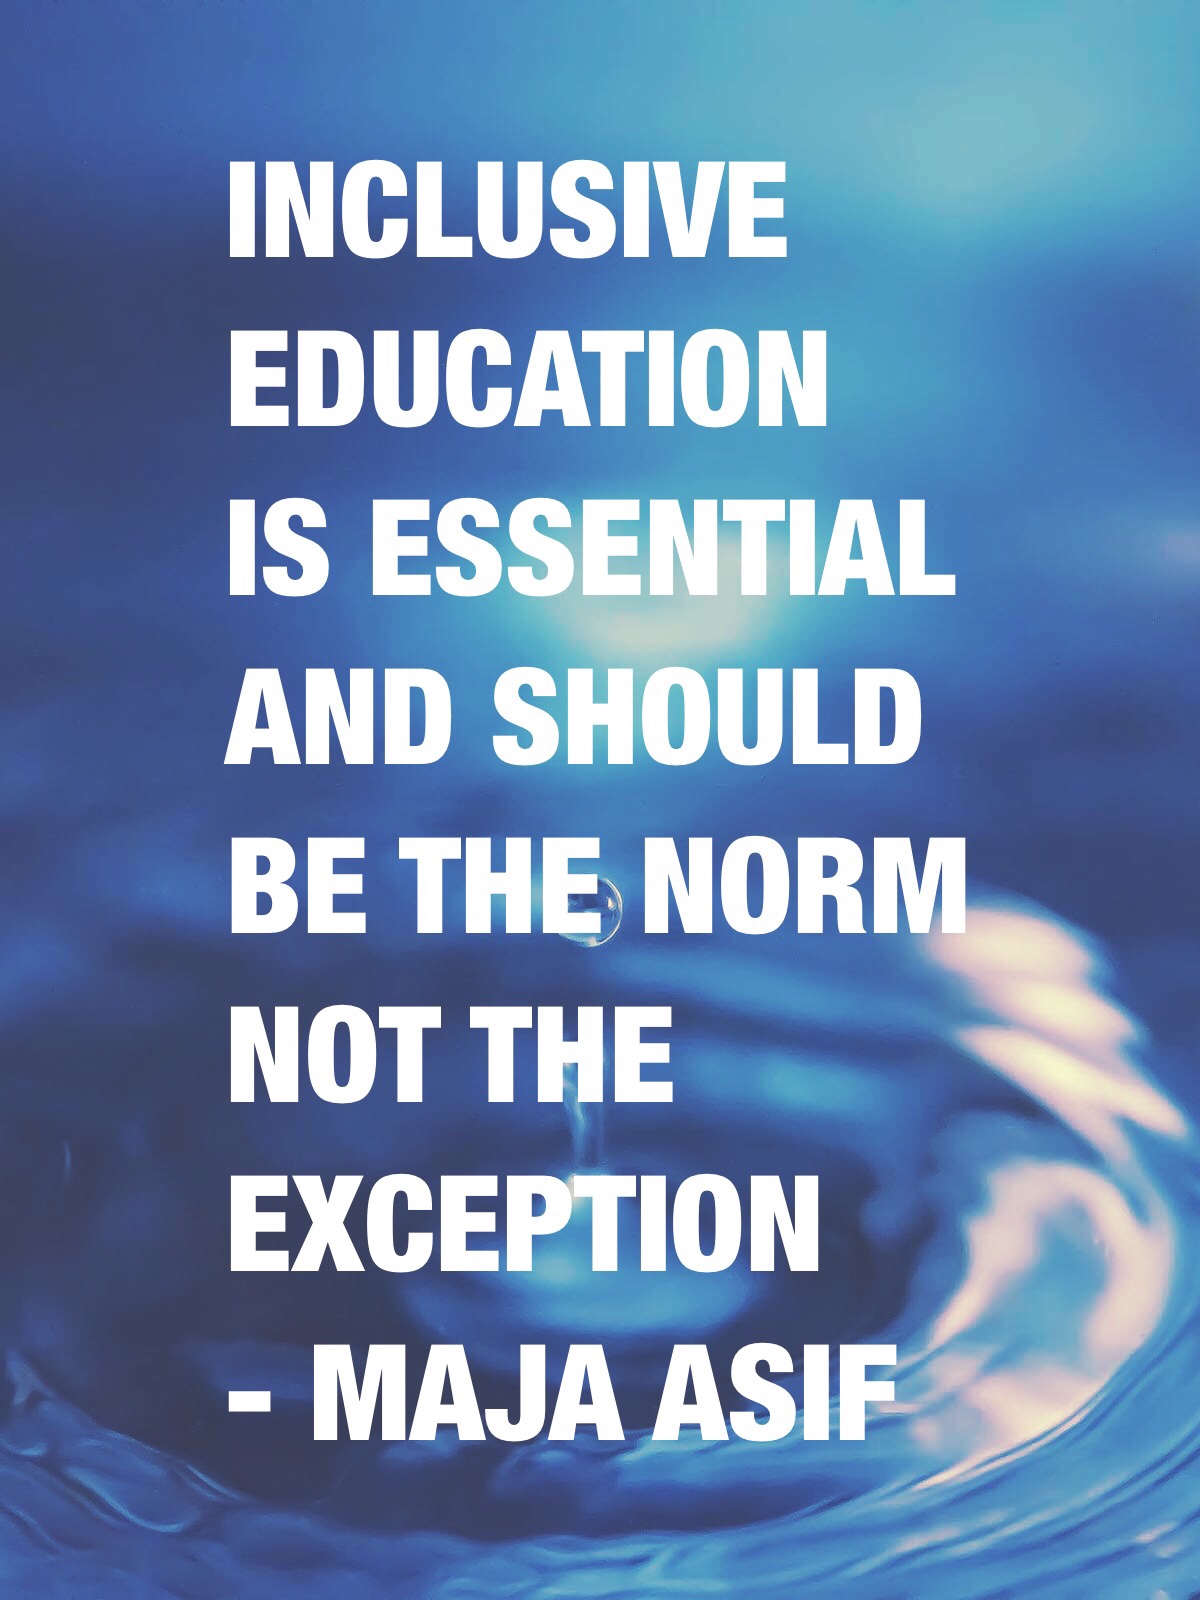 Inclusive education is essential and should be the norm not the exception - Maja Asif  